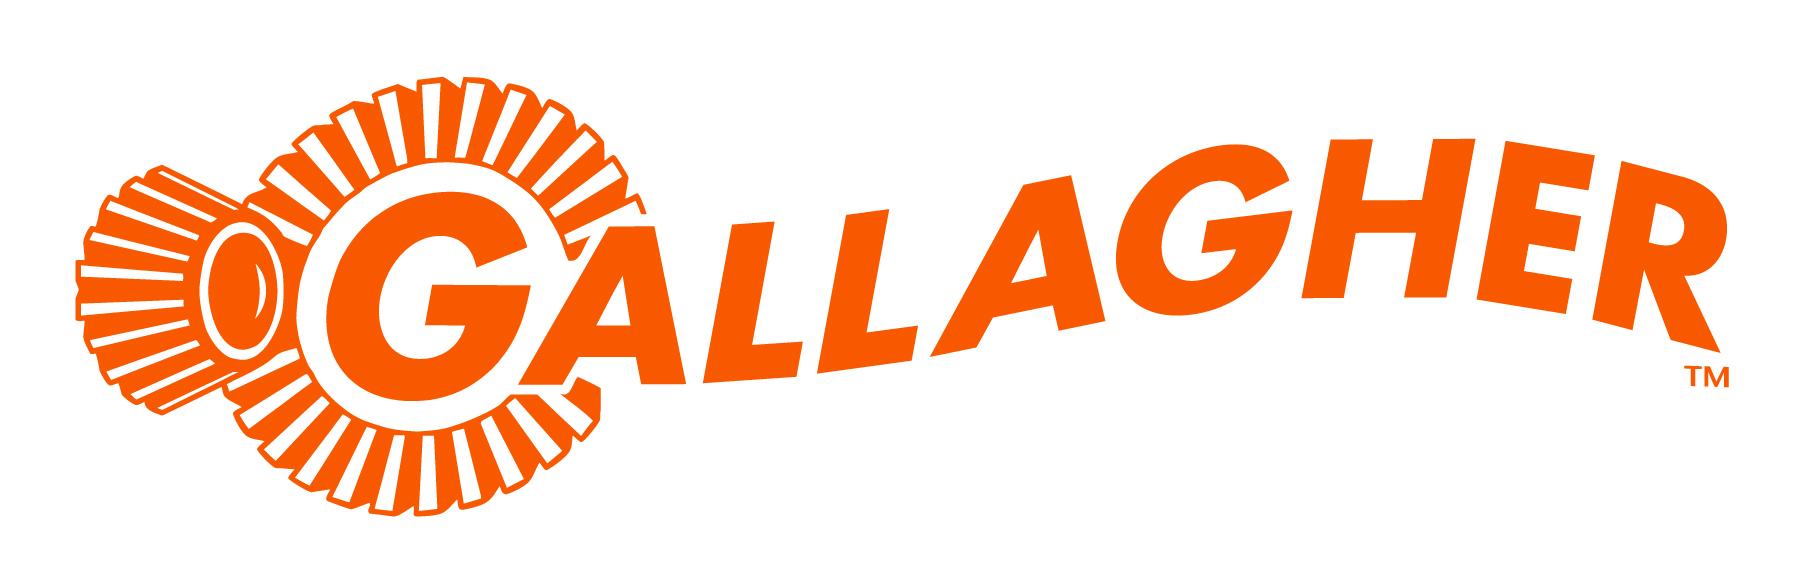 New Gallagher Logo - Gallagher introduces new technology to the security market